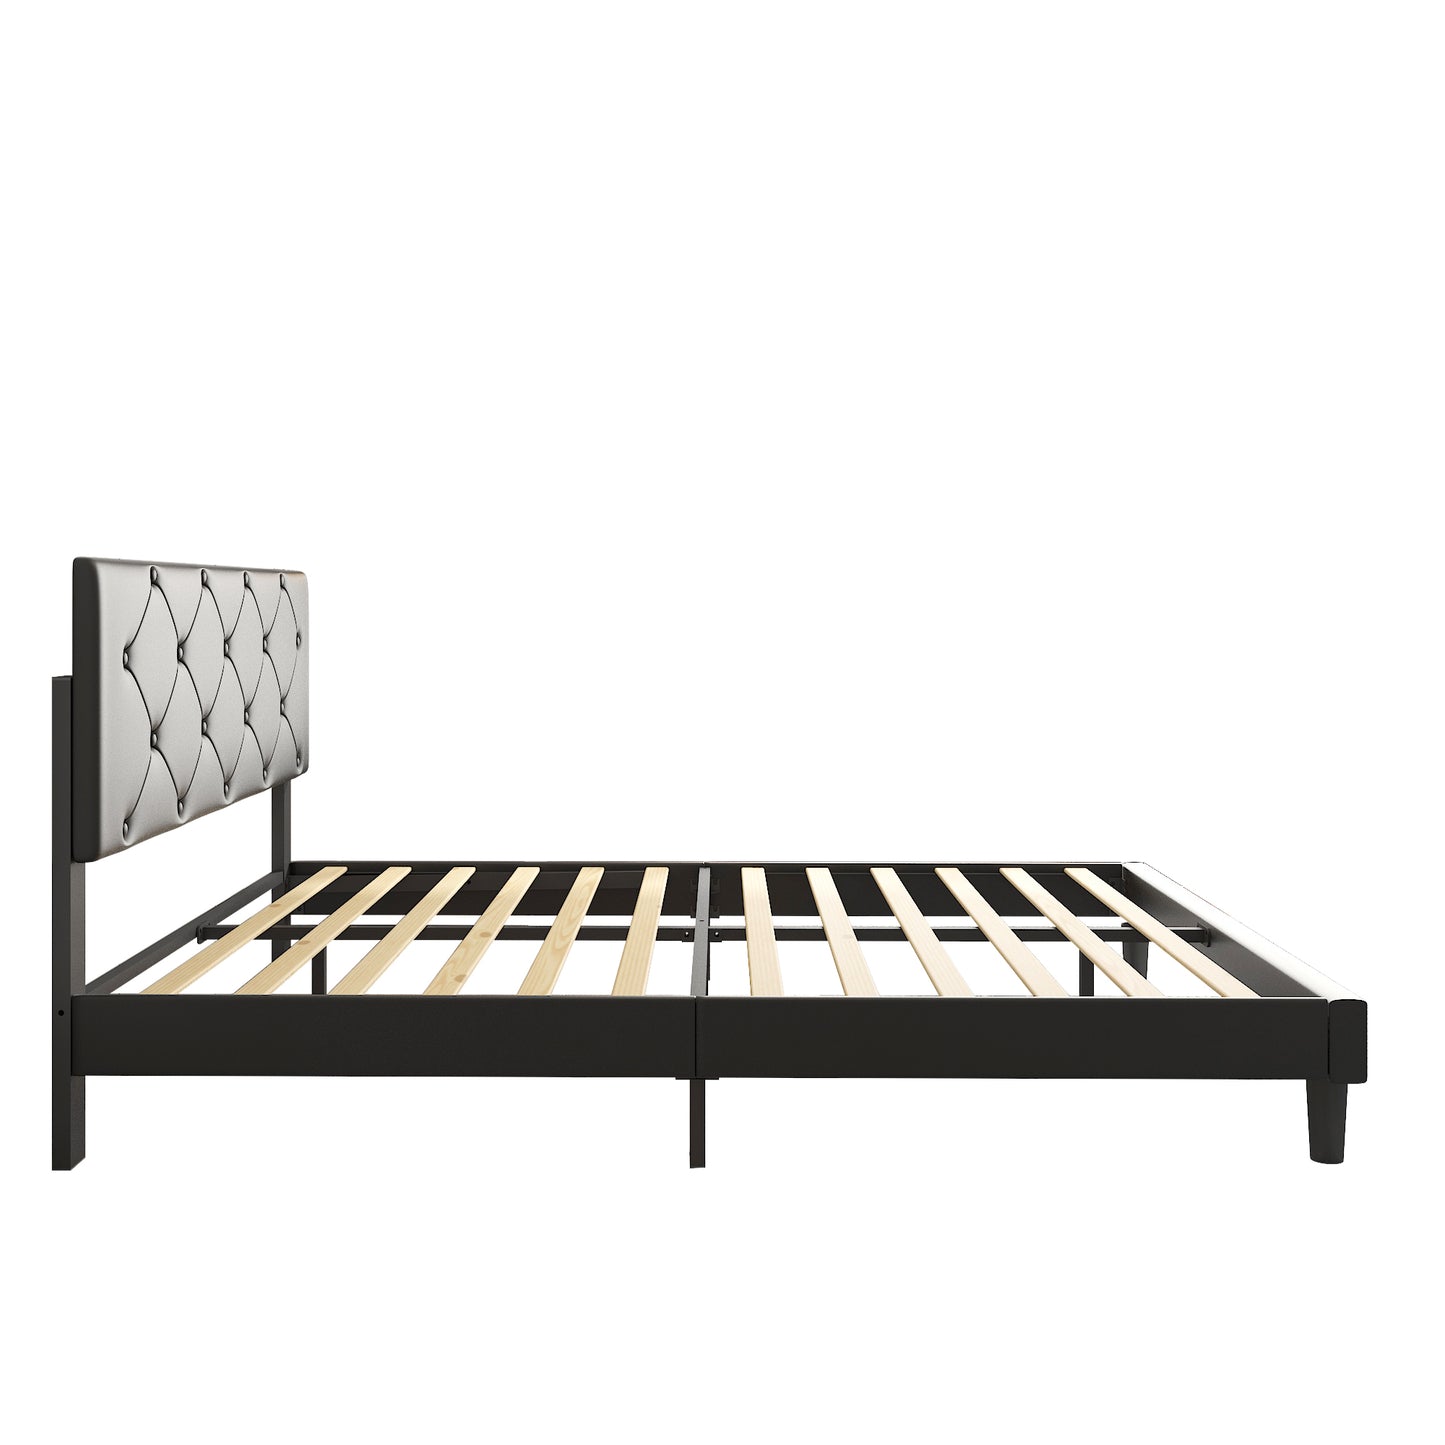 SYNGAR Black Faux Leather Upholstered Platform Bed Frame Queen Size with Height Adjustable Headboard, Metal Mattress Foundation with Strong Wooden Slat Support, No Box Spring Needed